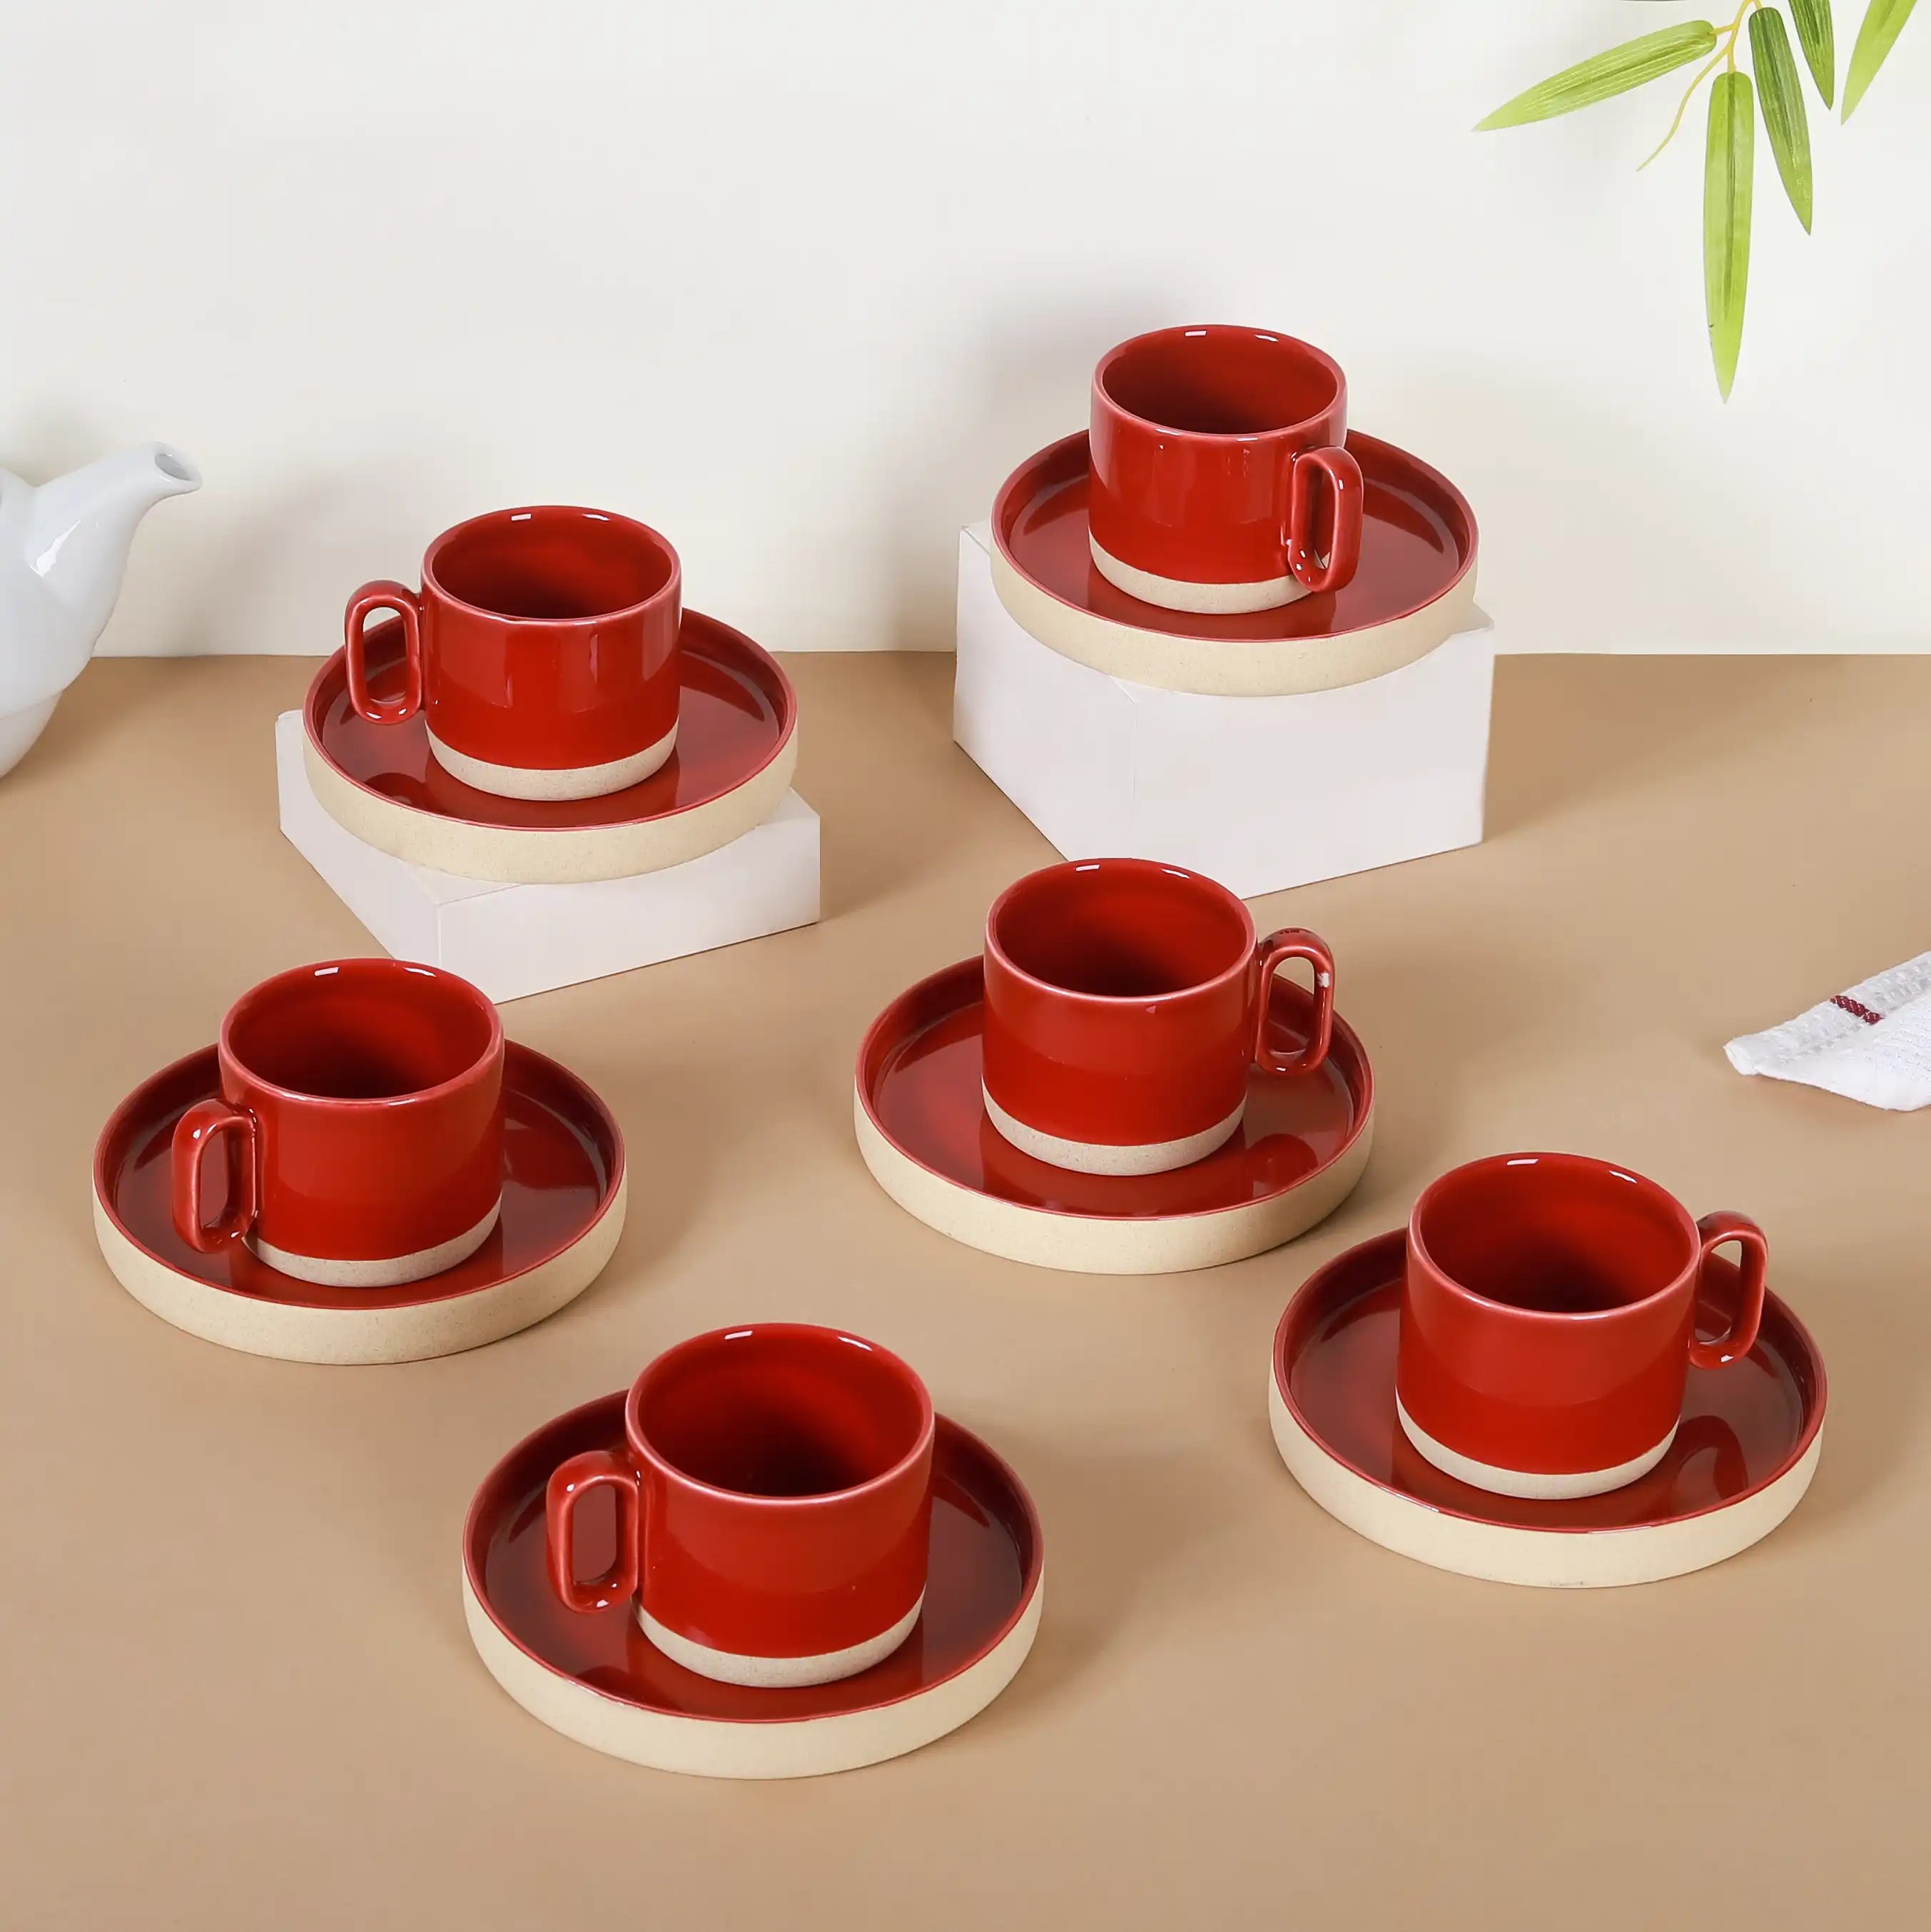 Tea Cup Set - Buy Cup And Saucer Set Online In India